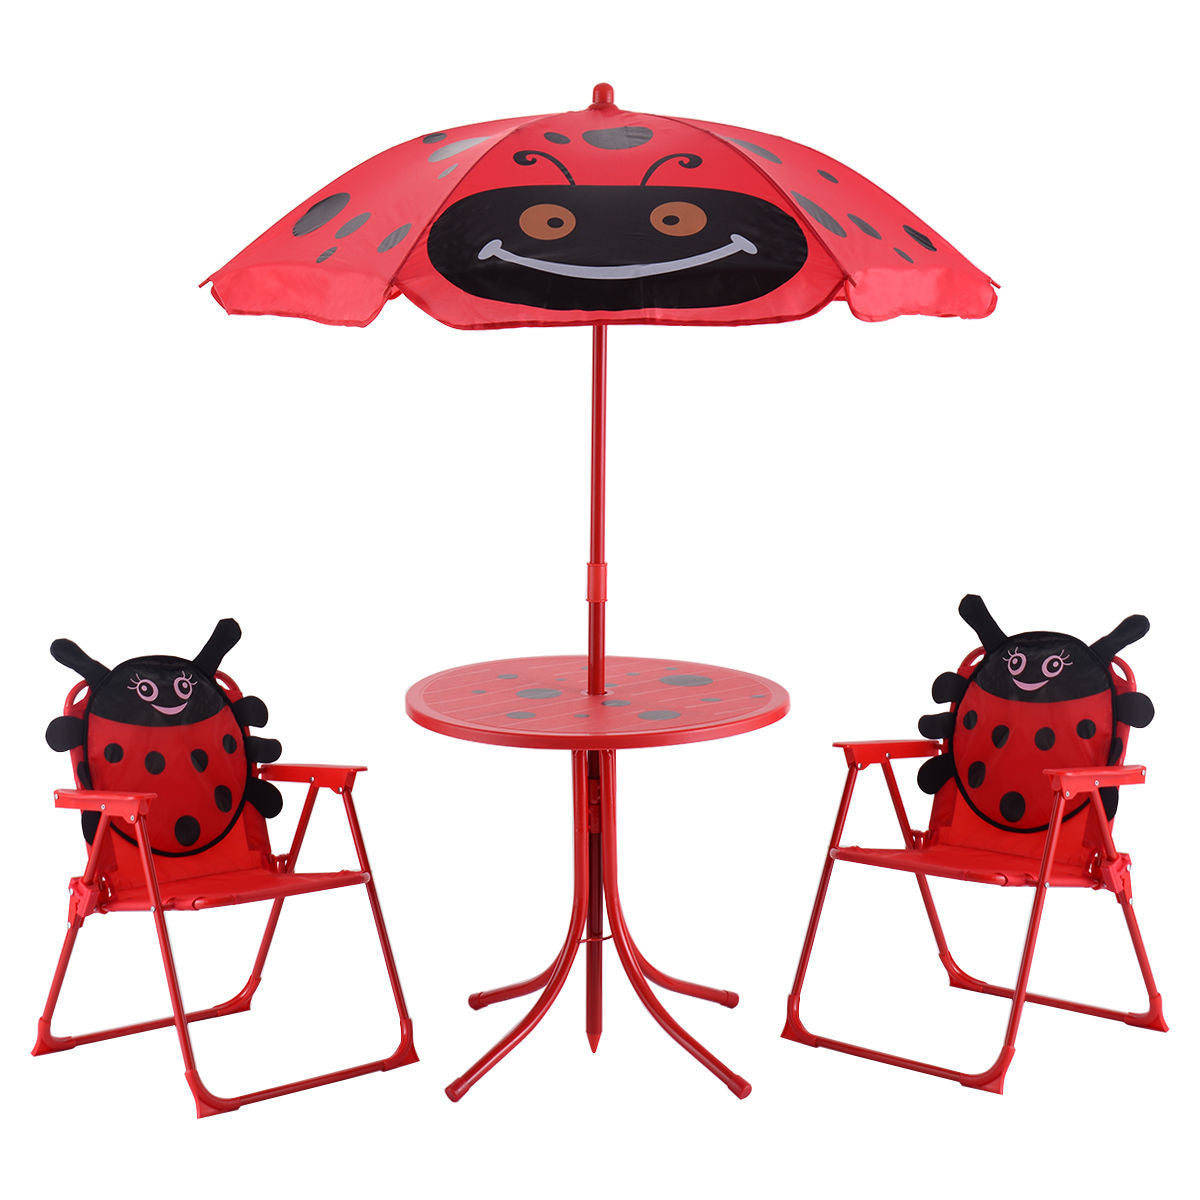 Kids Patio Folding Table and Chairs Set Beetle with Umbrella - Color: Red